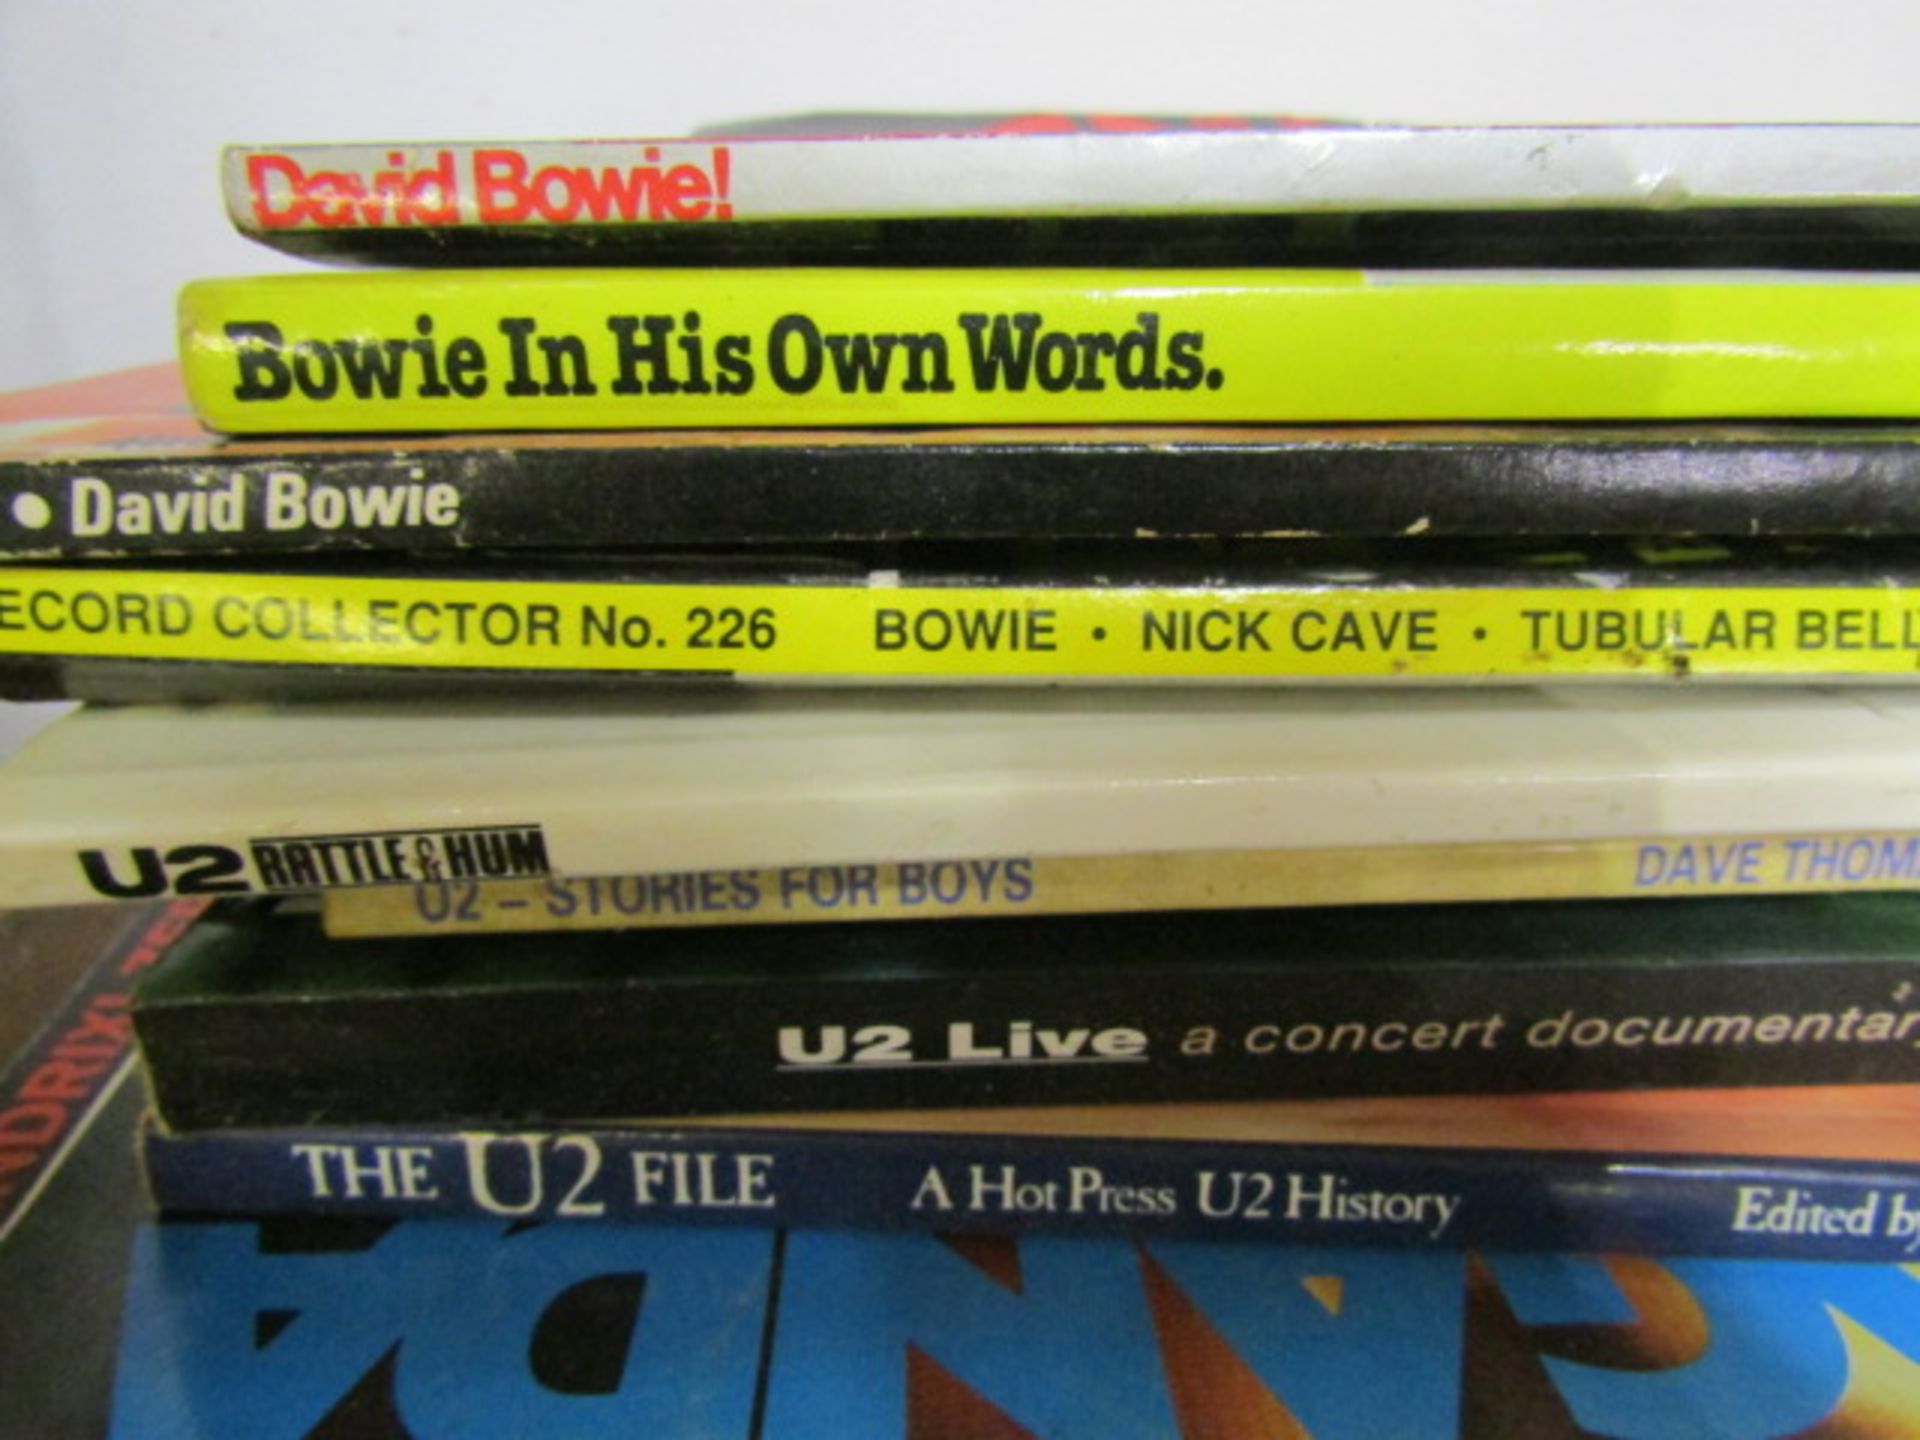 Signed? David Bowie books, mags one with signature - unsure if legit plus U2 books - Image 2 of 4